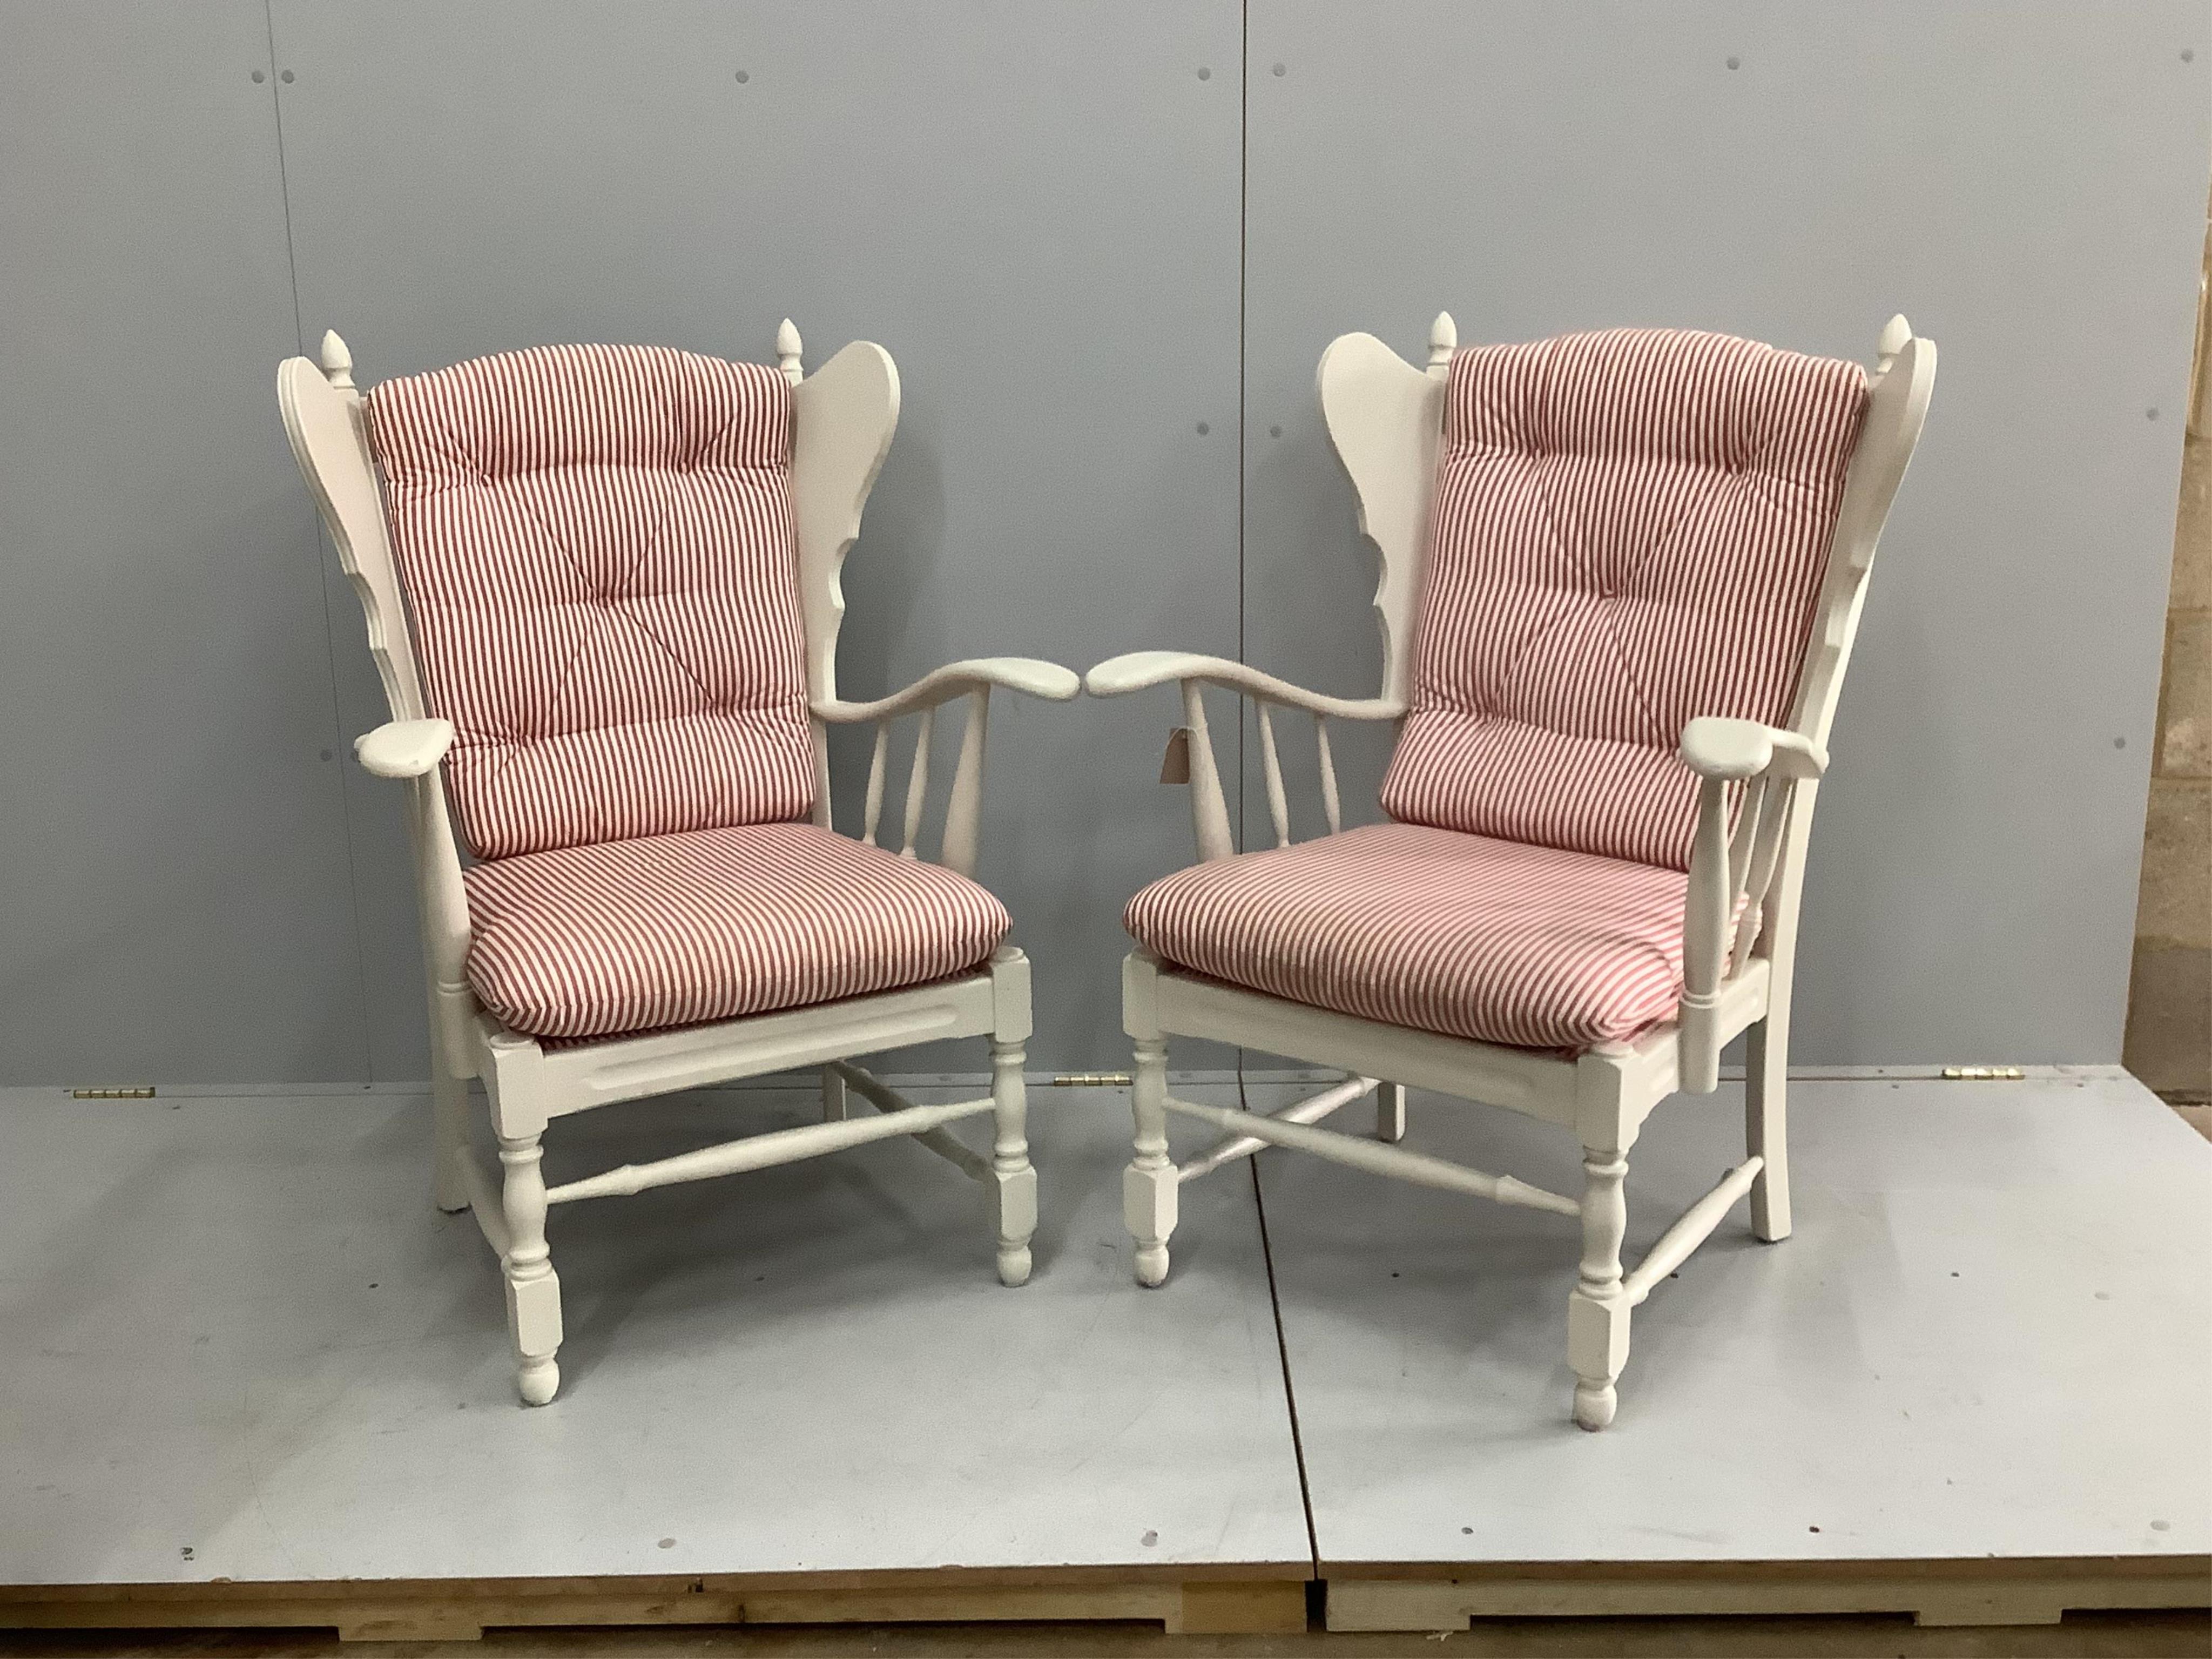 A pair of 20th century Swedish painted armchairs, width 71cm, depth 62cm, height 104cm. Condition - good